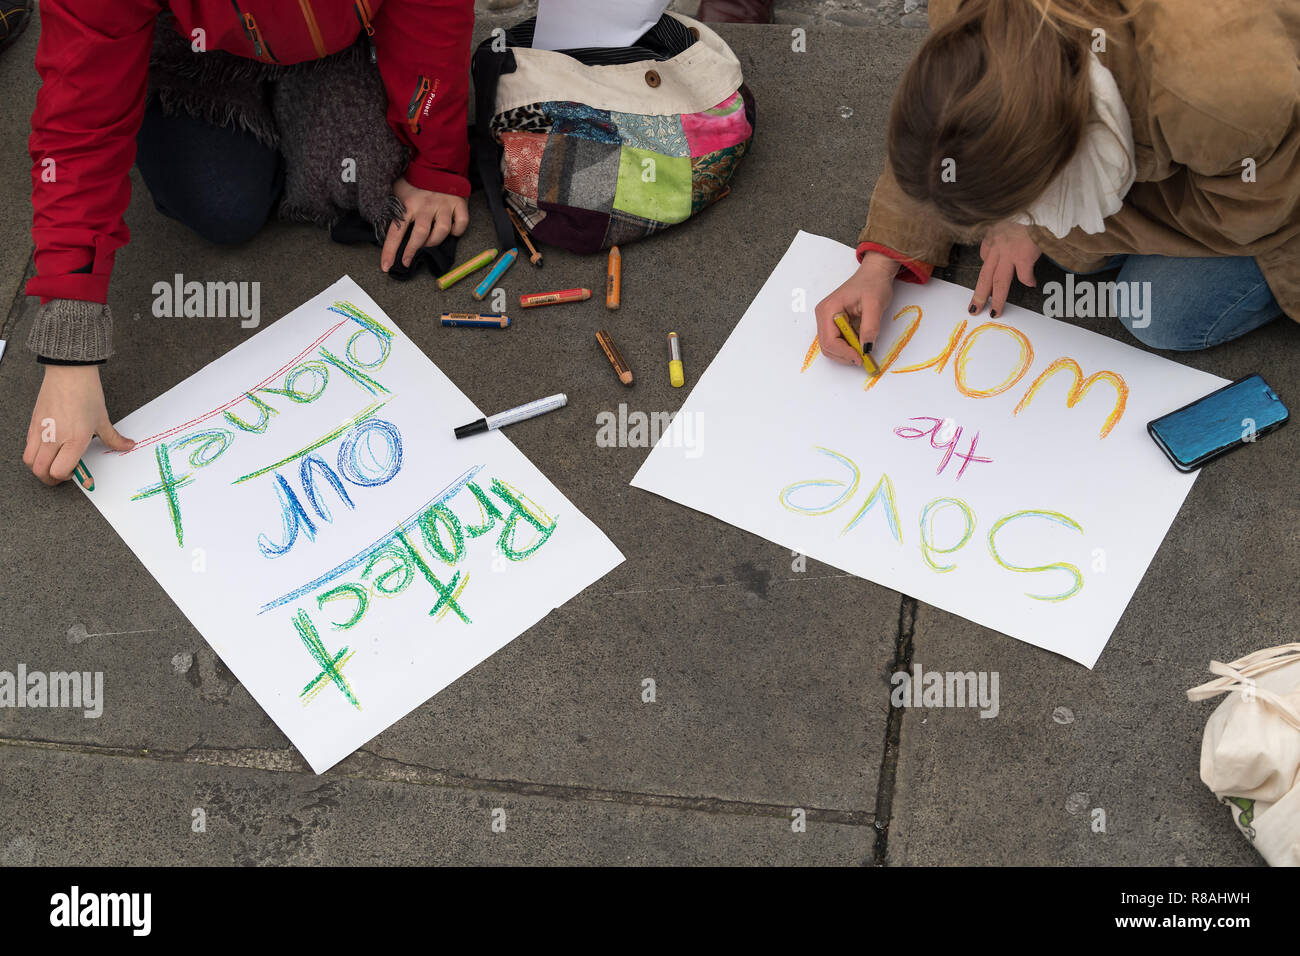 Berlin, Germany. 14th Dec, 2018. Students demonstrate in the city centre under the motto 'Future without climate chaos' and paint posters with the inscription 'save the world' and 'Protect our planet'. Credit: Peter Kneffel/dpa/Alamy Live News Stock Photo